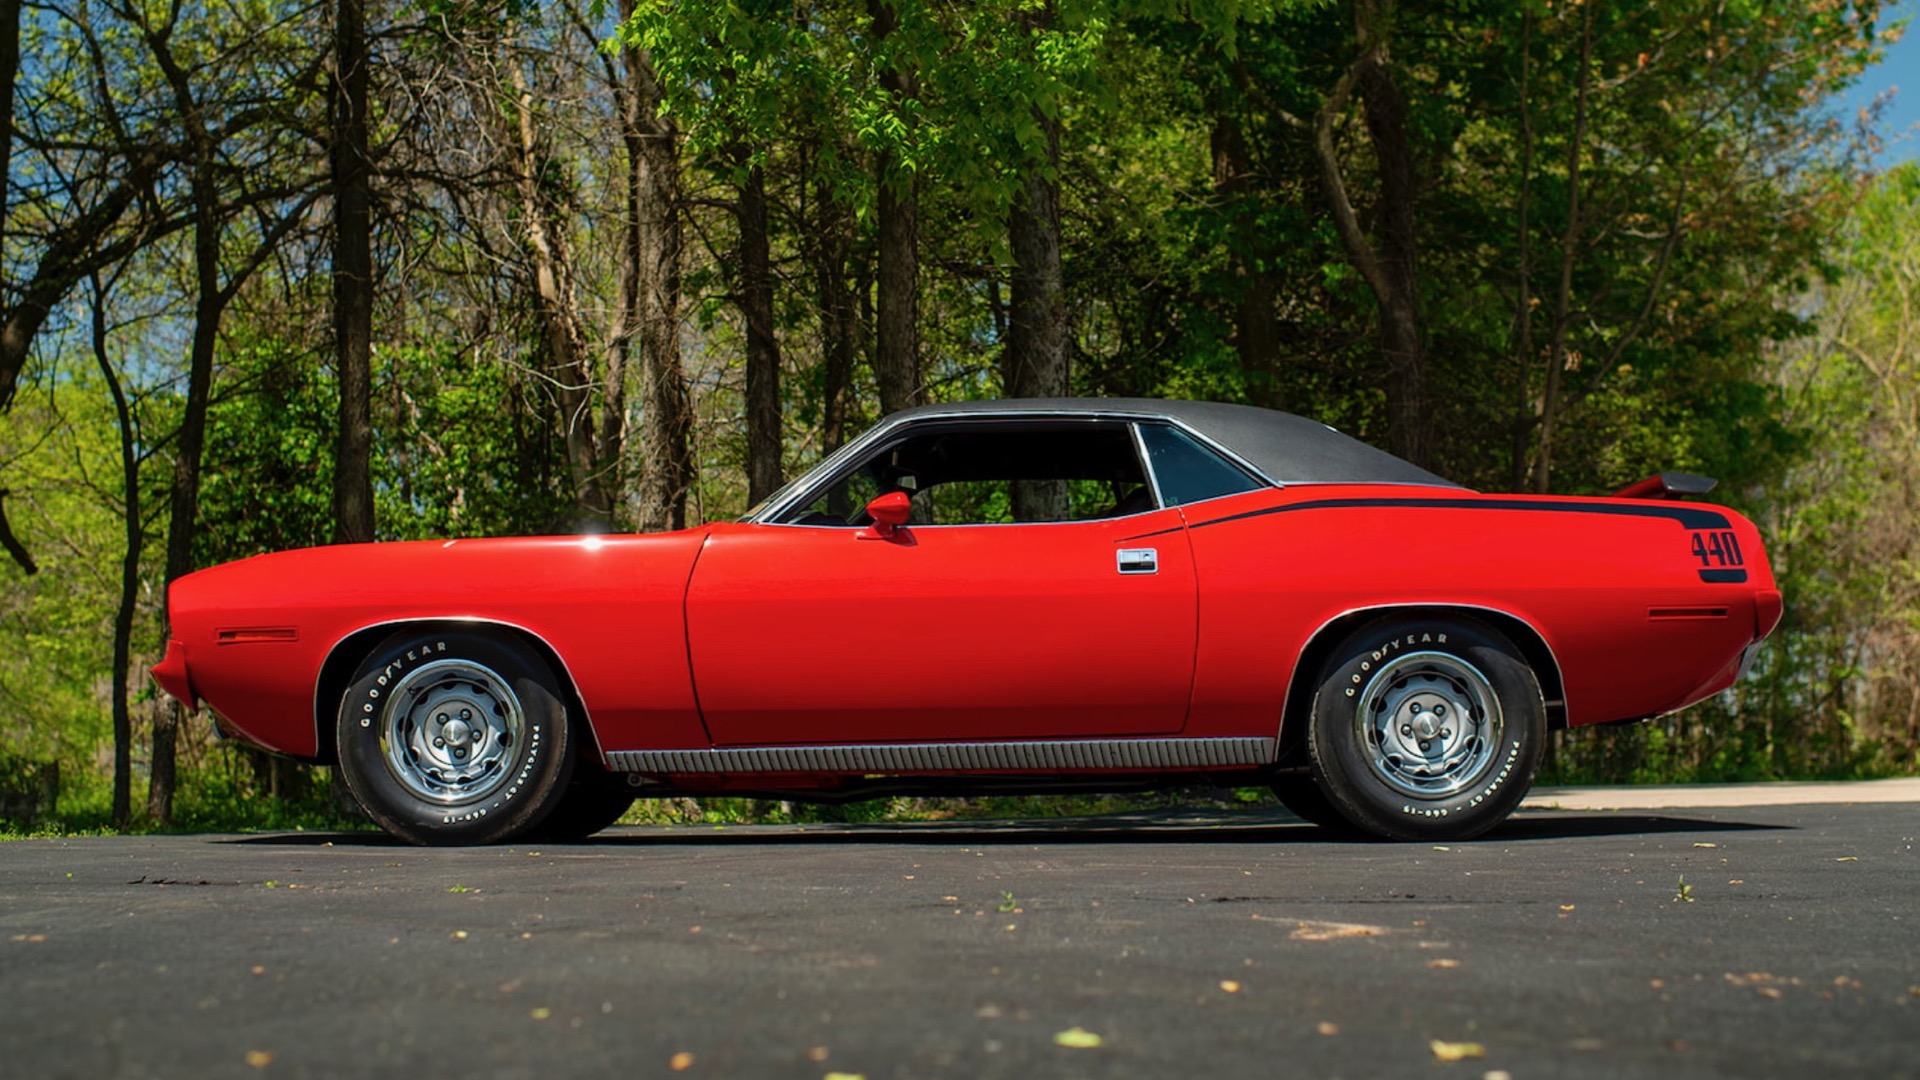 The 1970 Plymouth Cuda is up for auction